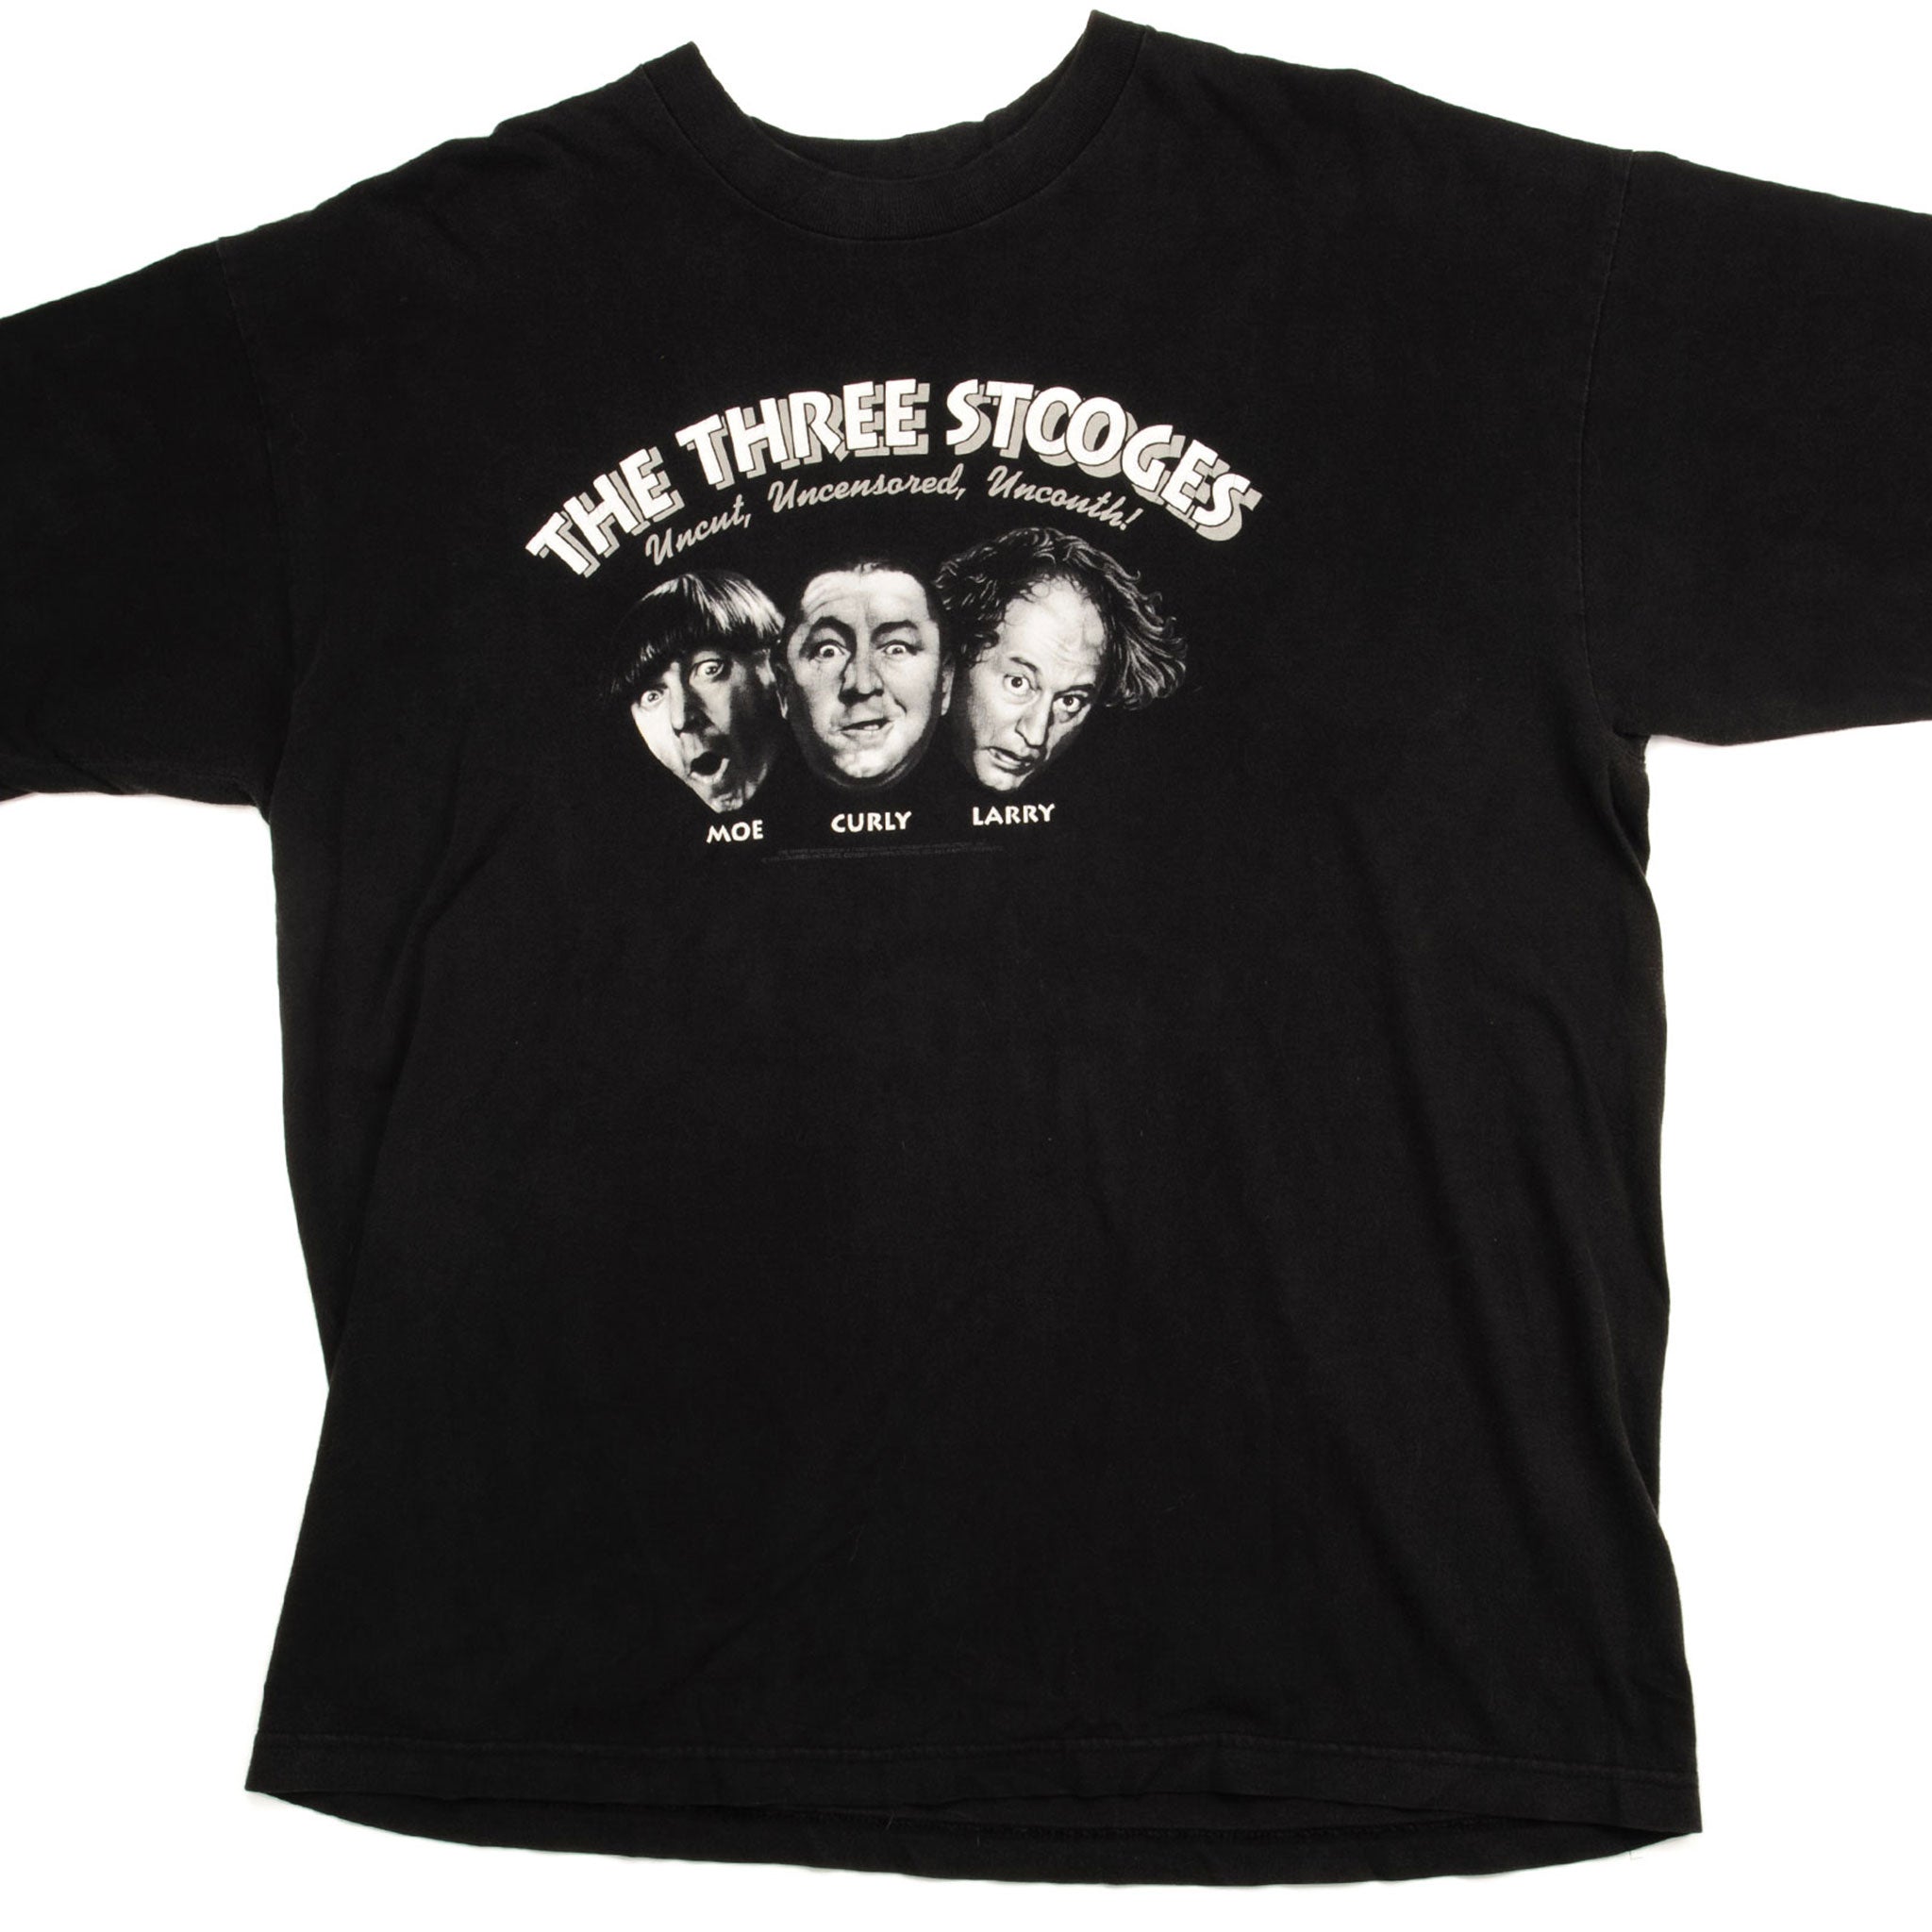 VINTAGE THE THREE STOOGES TEE SHIRT 1995 SIZE XL MADE IN USA